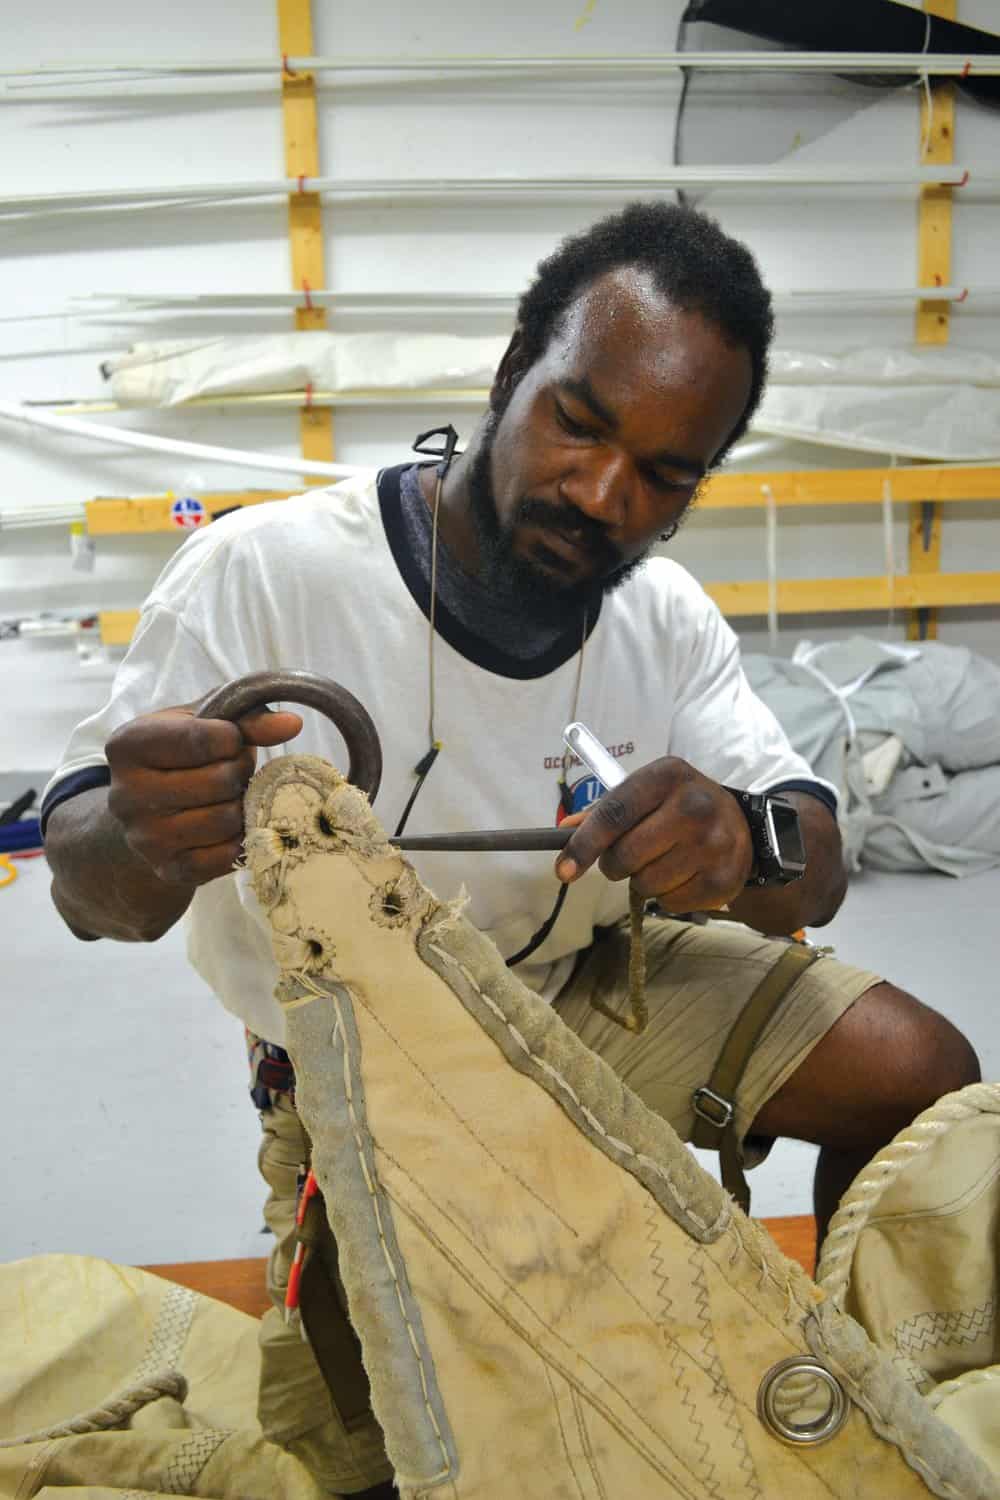  Dantes Chambre-Serres examines one of the  Eagle ’s old sails. Photo by Karen Soule. 